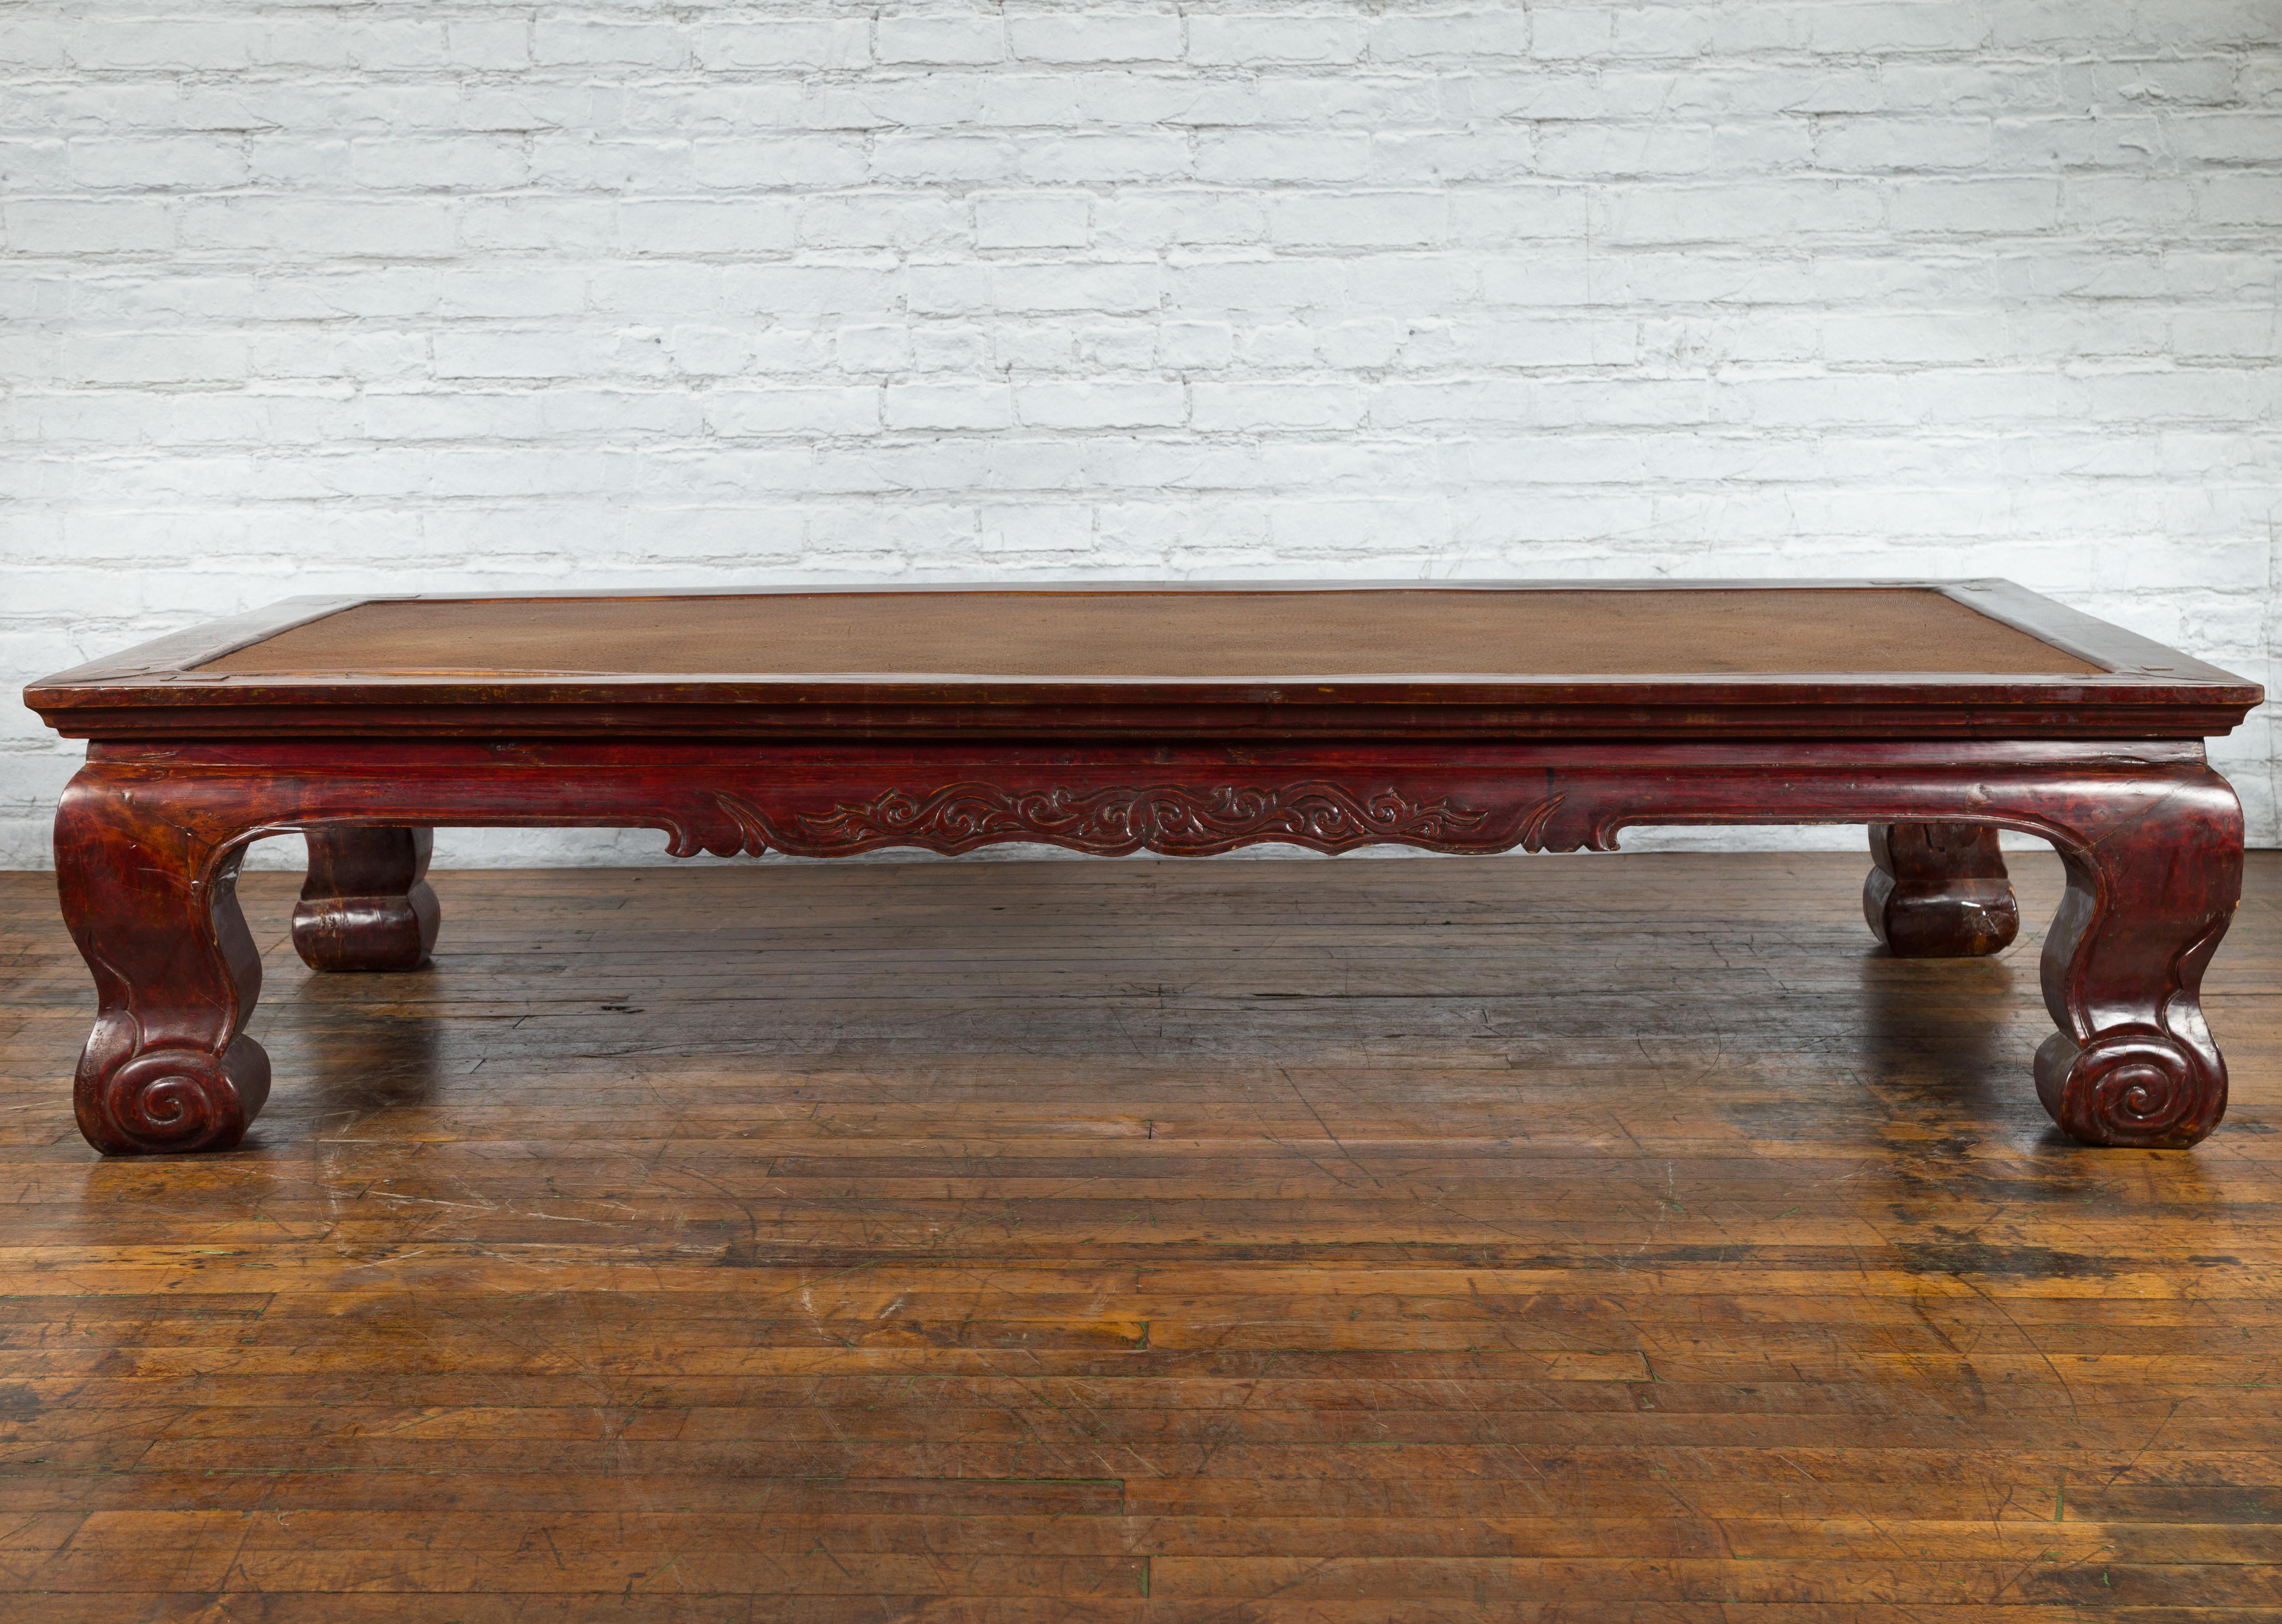 A large Chinese Qing Dynasty period mahogany stained coffee table from the 19th century, with rattan top, carved apron and scrolling legs. Created in China during the Qing Dynasty period in the 19th century, this large coffee table features a